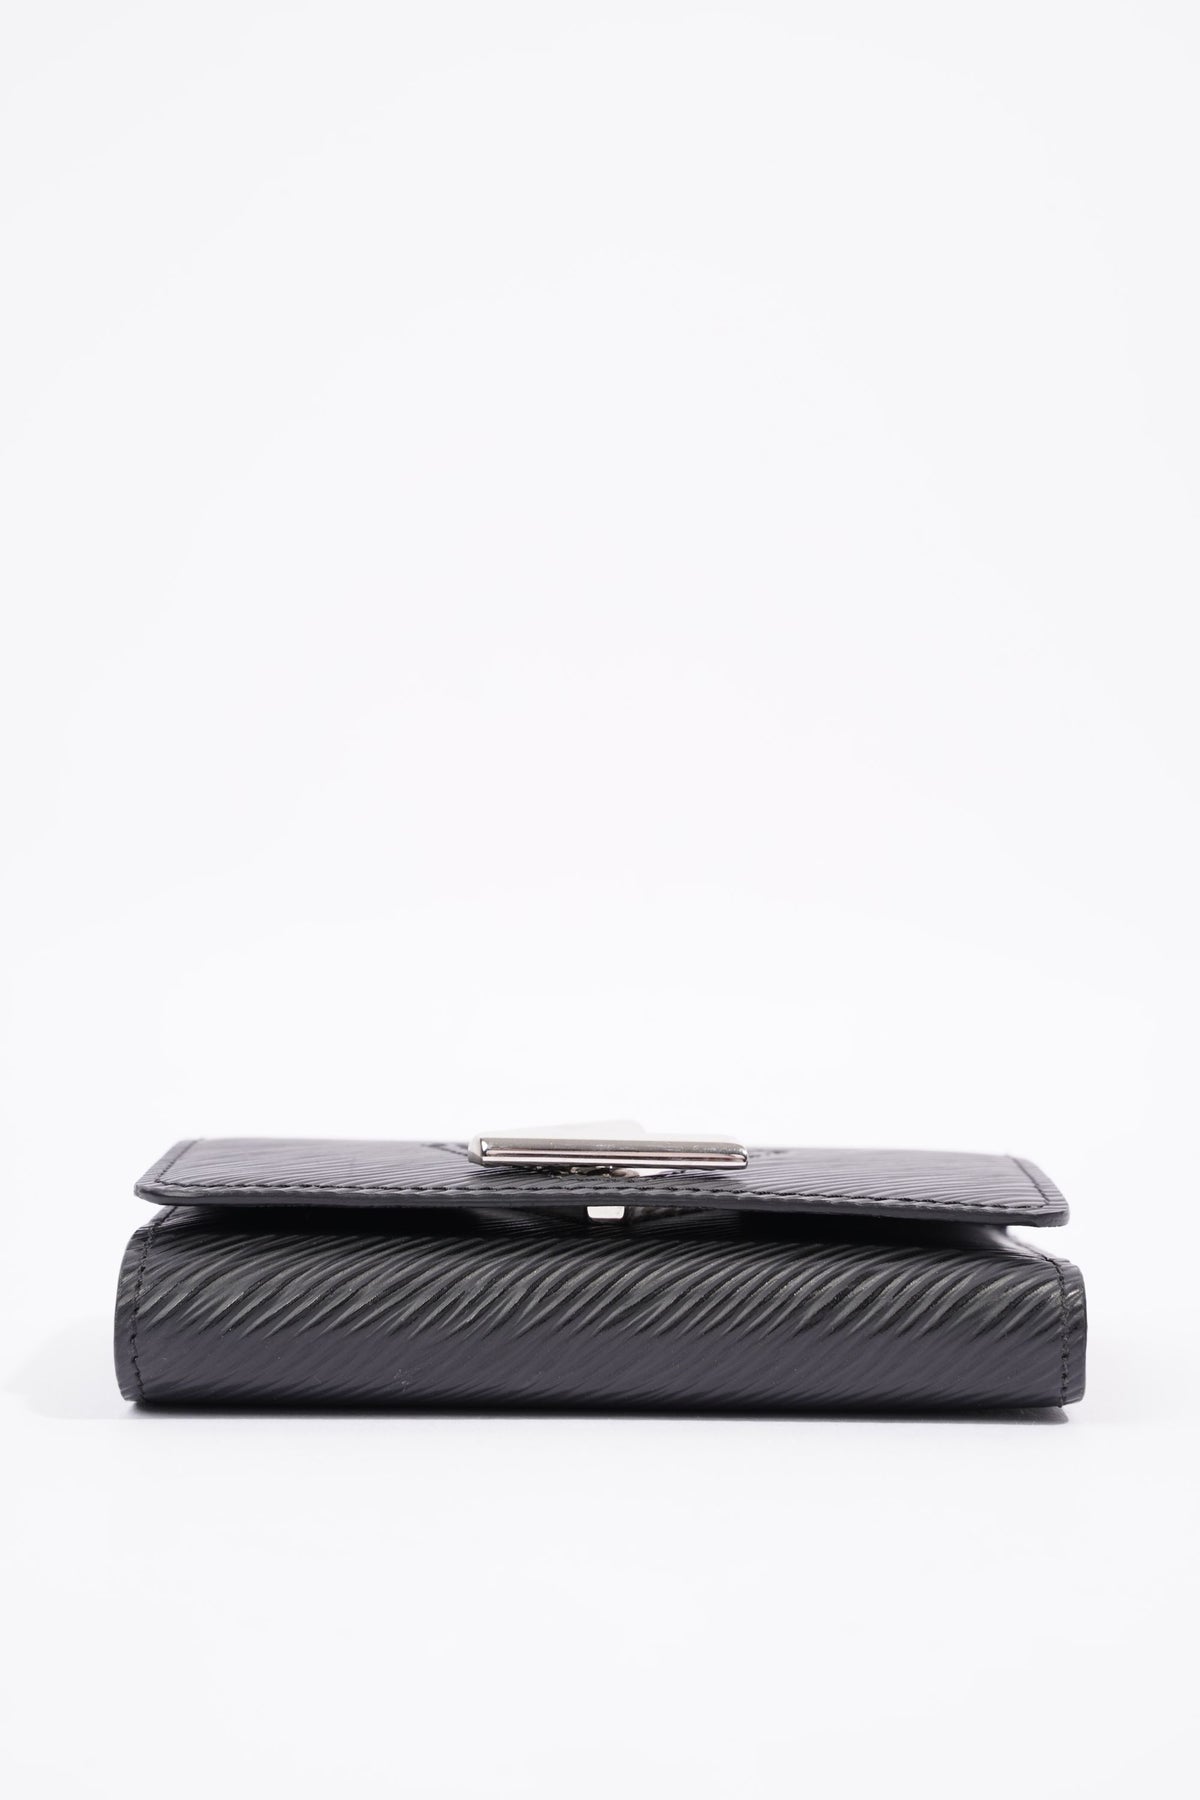 Twist Wallet Epi Leather - Women - Small Leather Goods